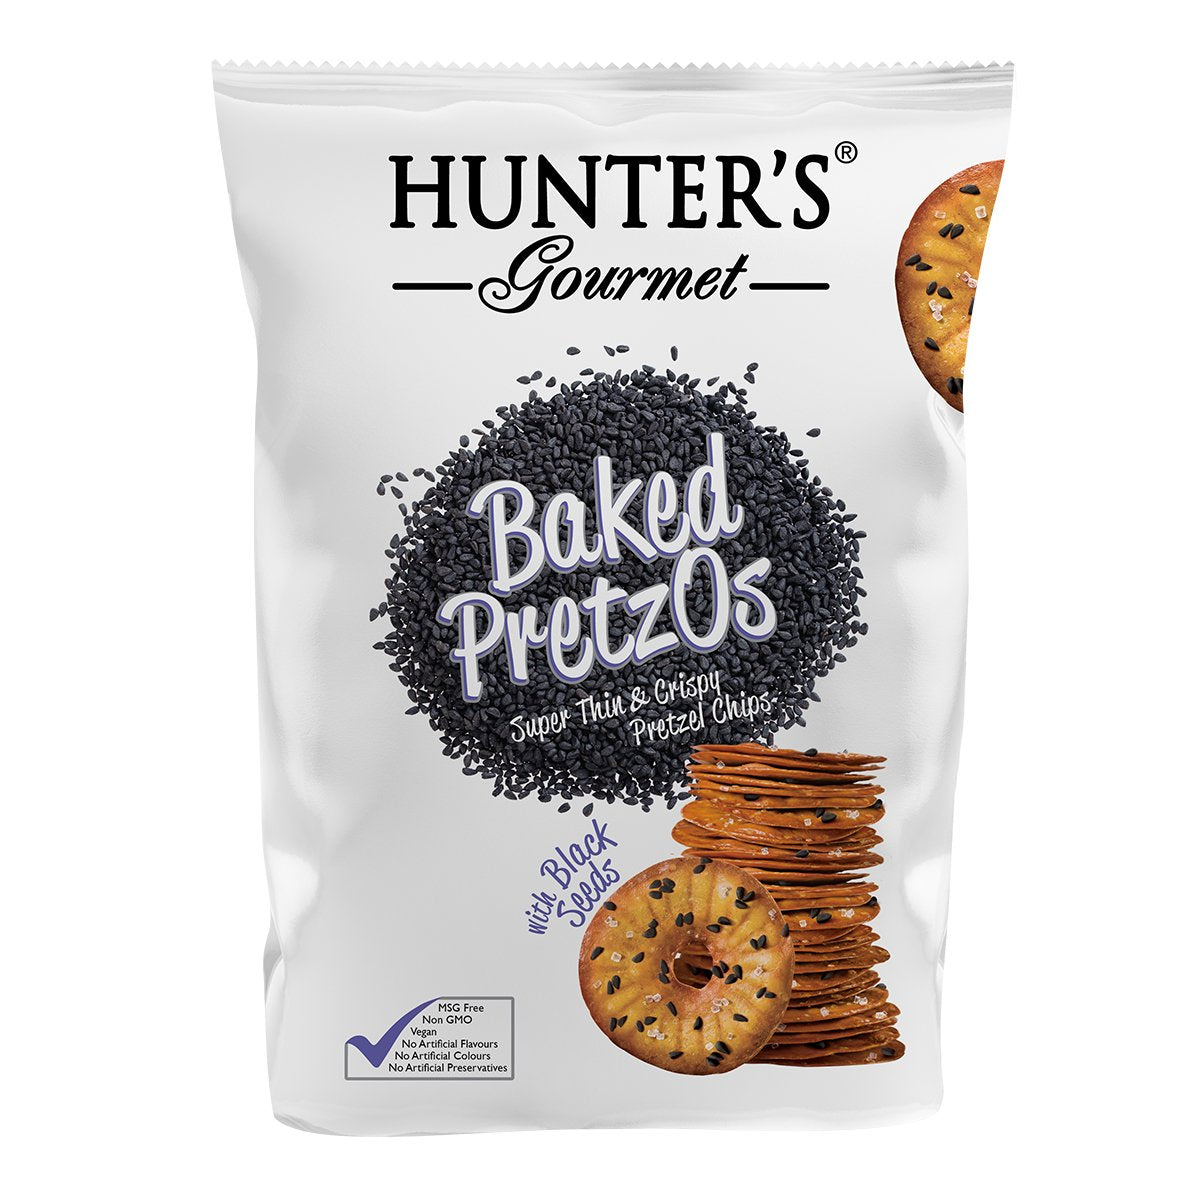 HUNTER'S GOURMET Baked Pretzos - with Black Seeds, 180g